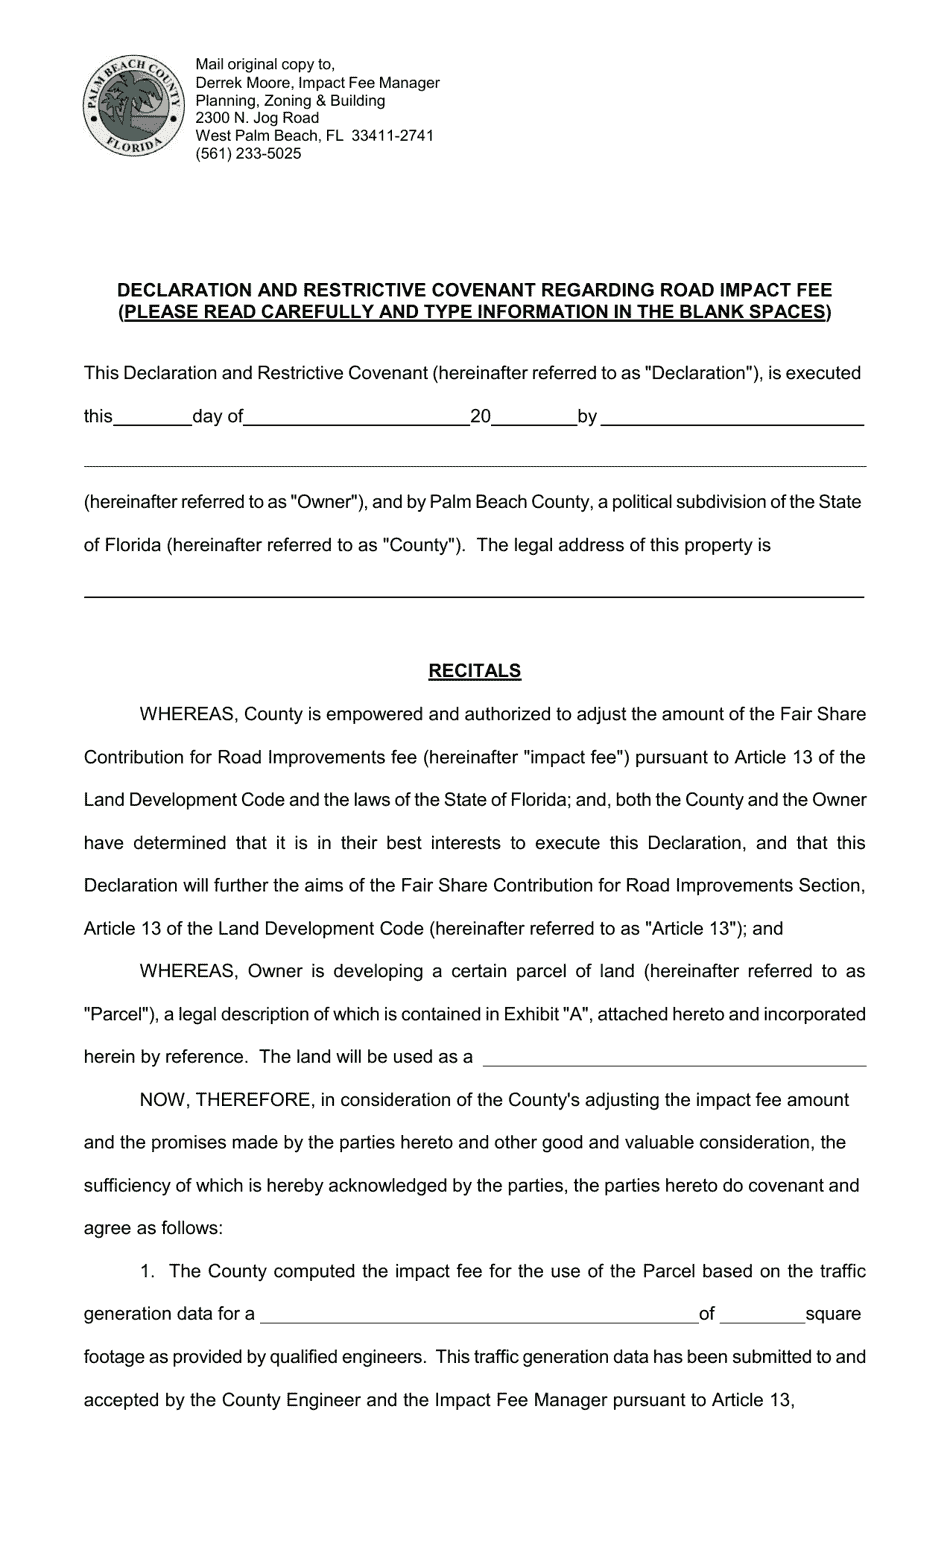 Declaration and Restrictive Covenant Regarding Road Impact Fee - Palm Beach County, Florida, Page 1